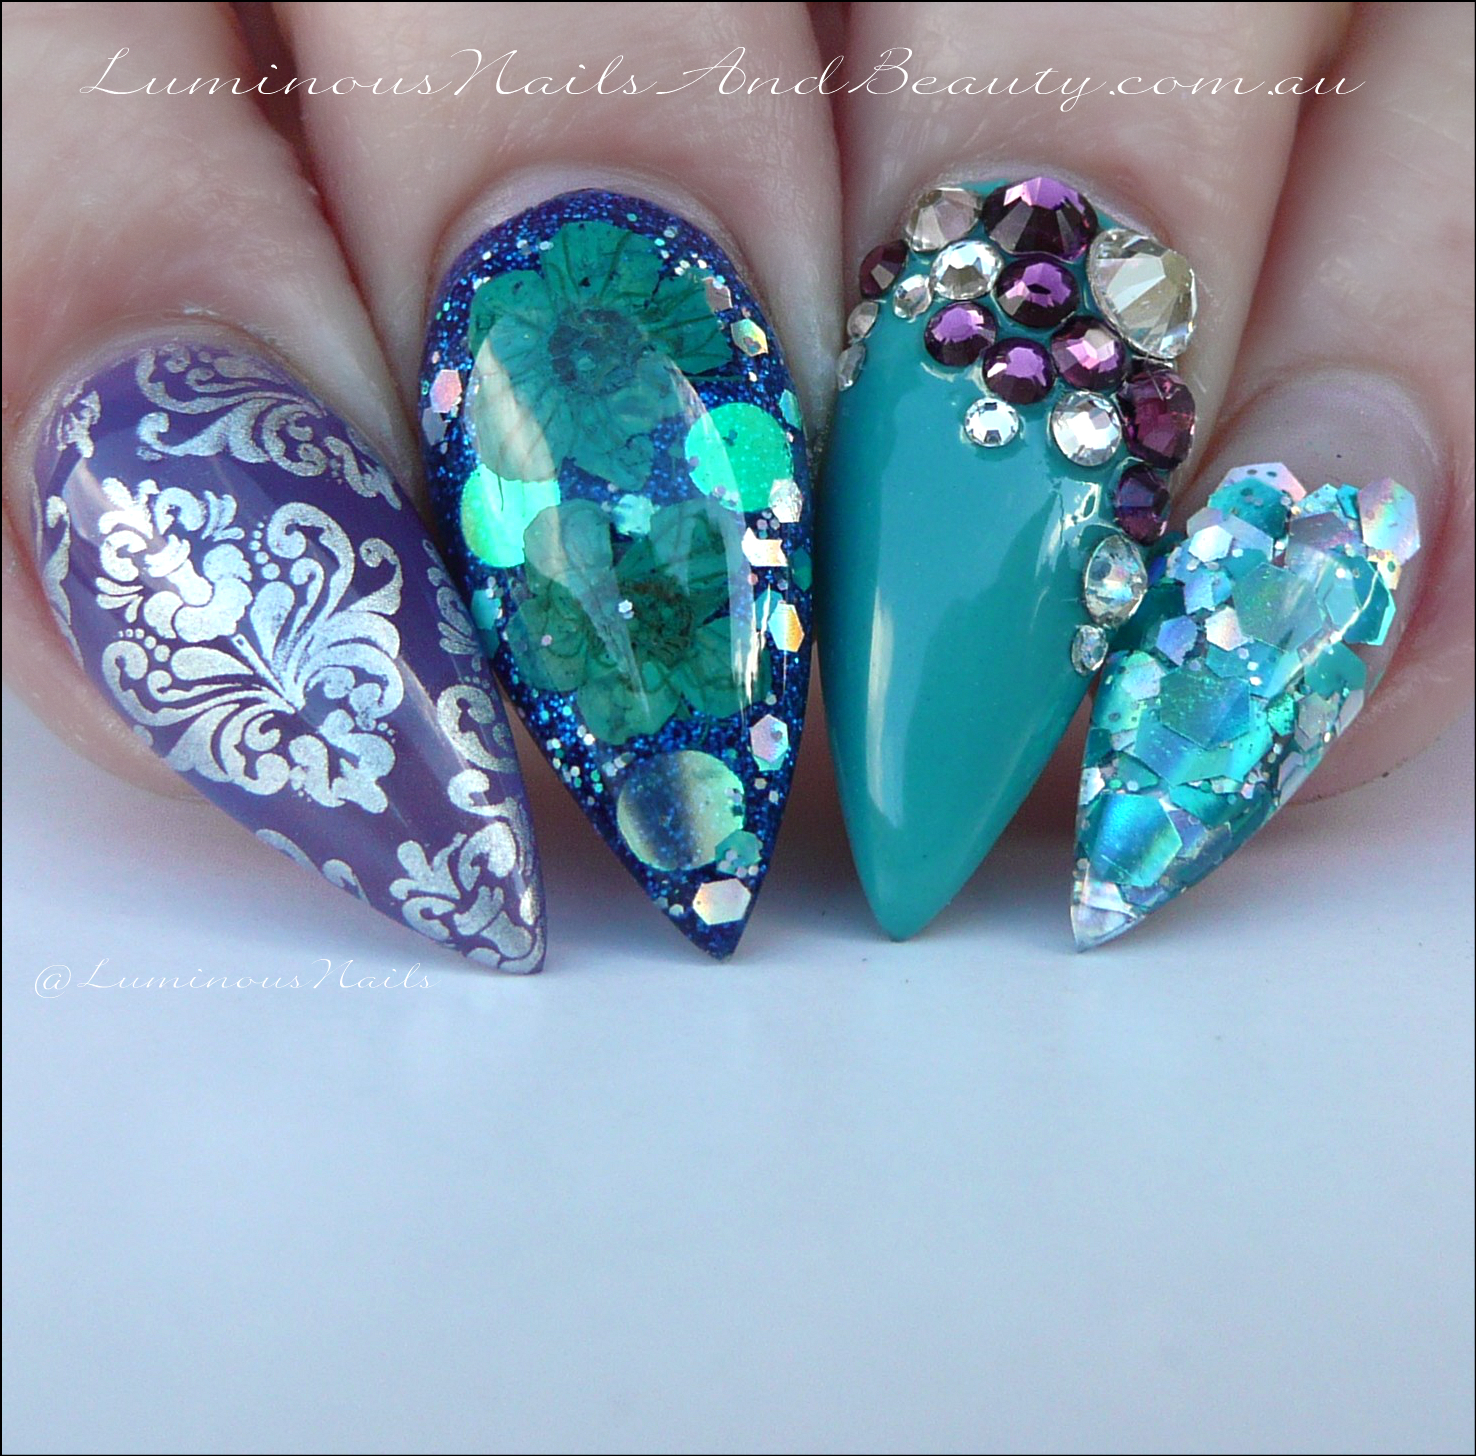 Luminous Nails: Teal, Navy & Purple Acrylic Nails with Dried Flowers ...